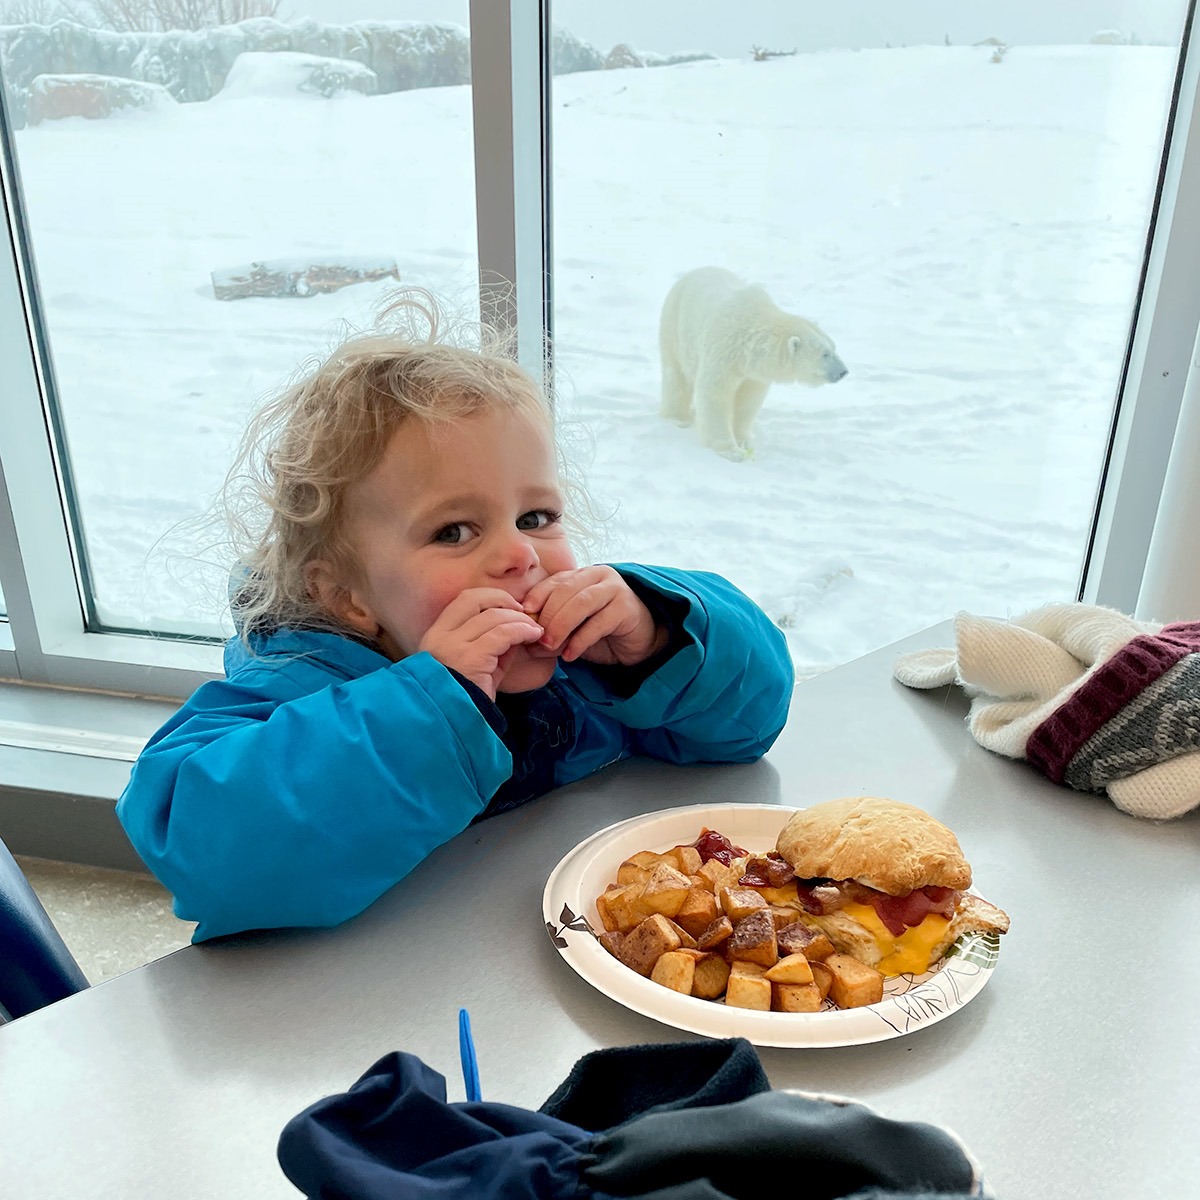 Child eats at the Tundra Grill with a polar bear in the background